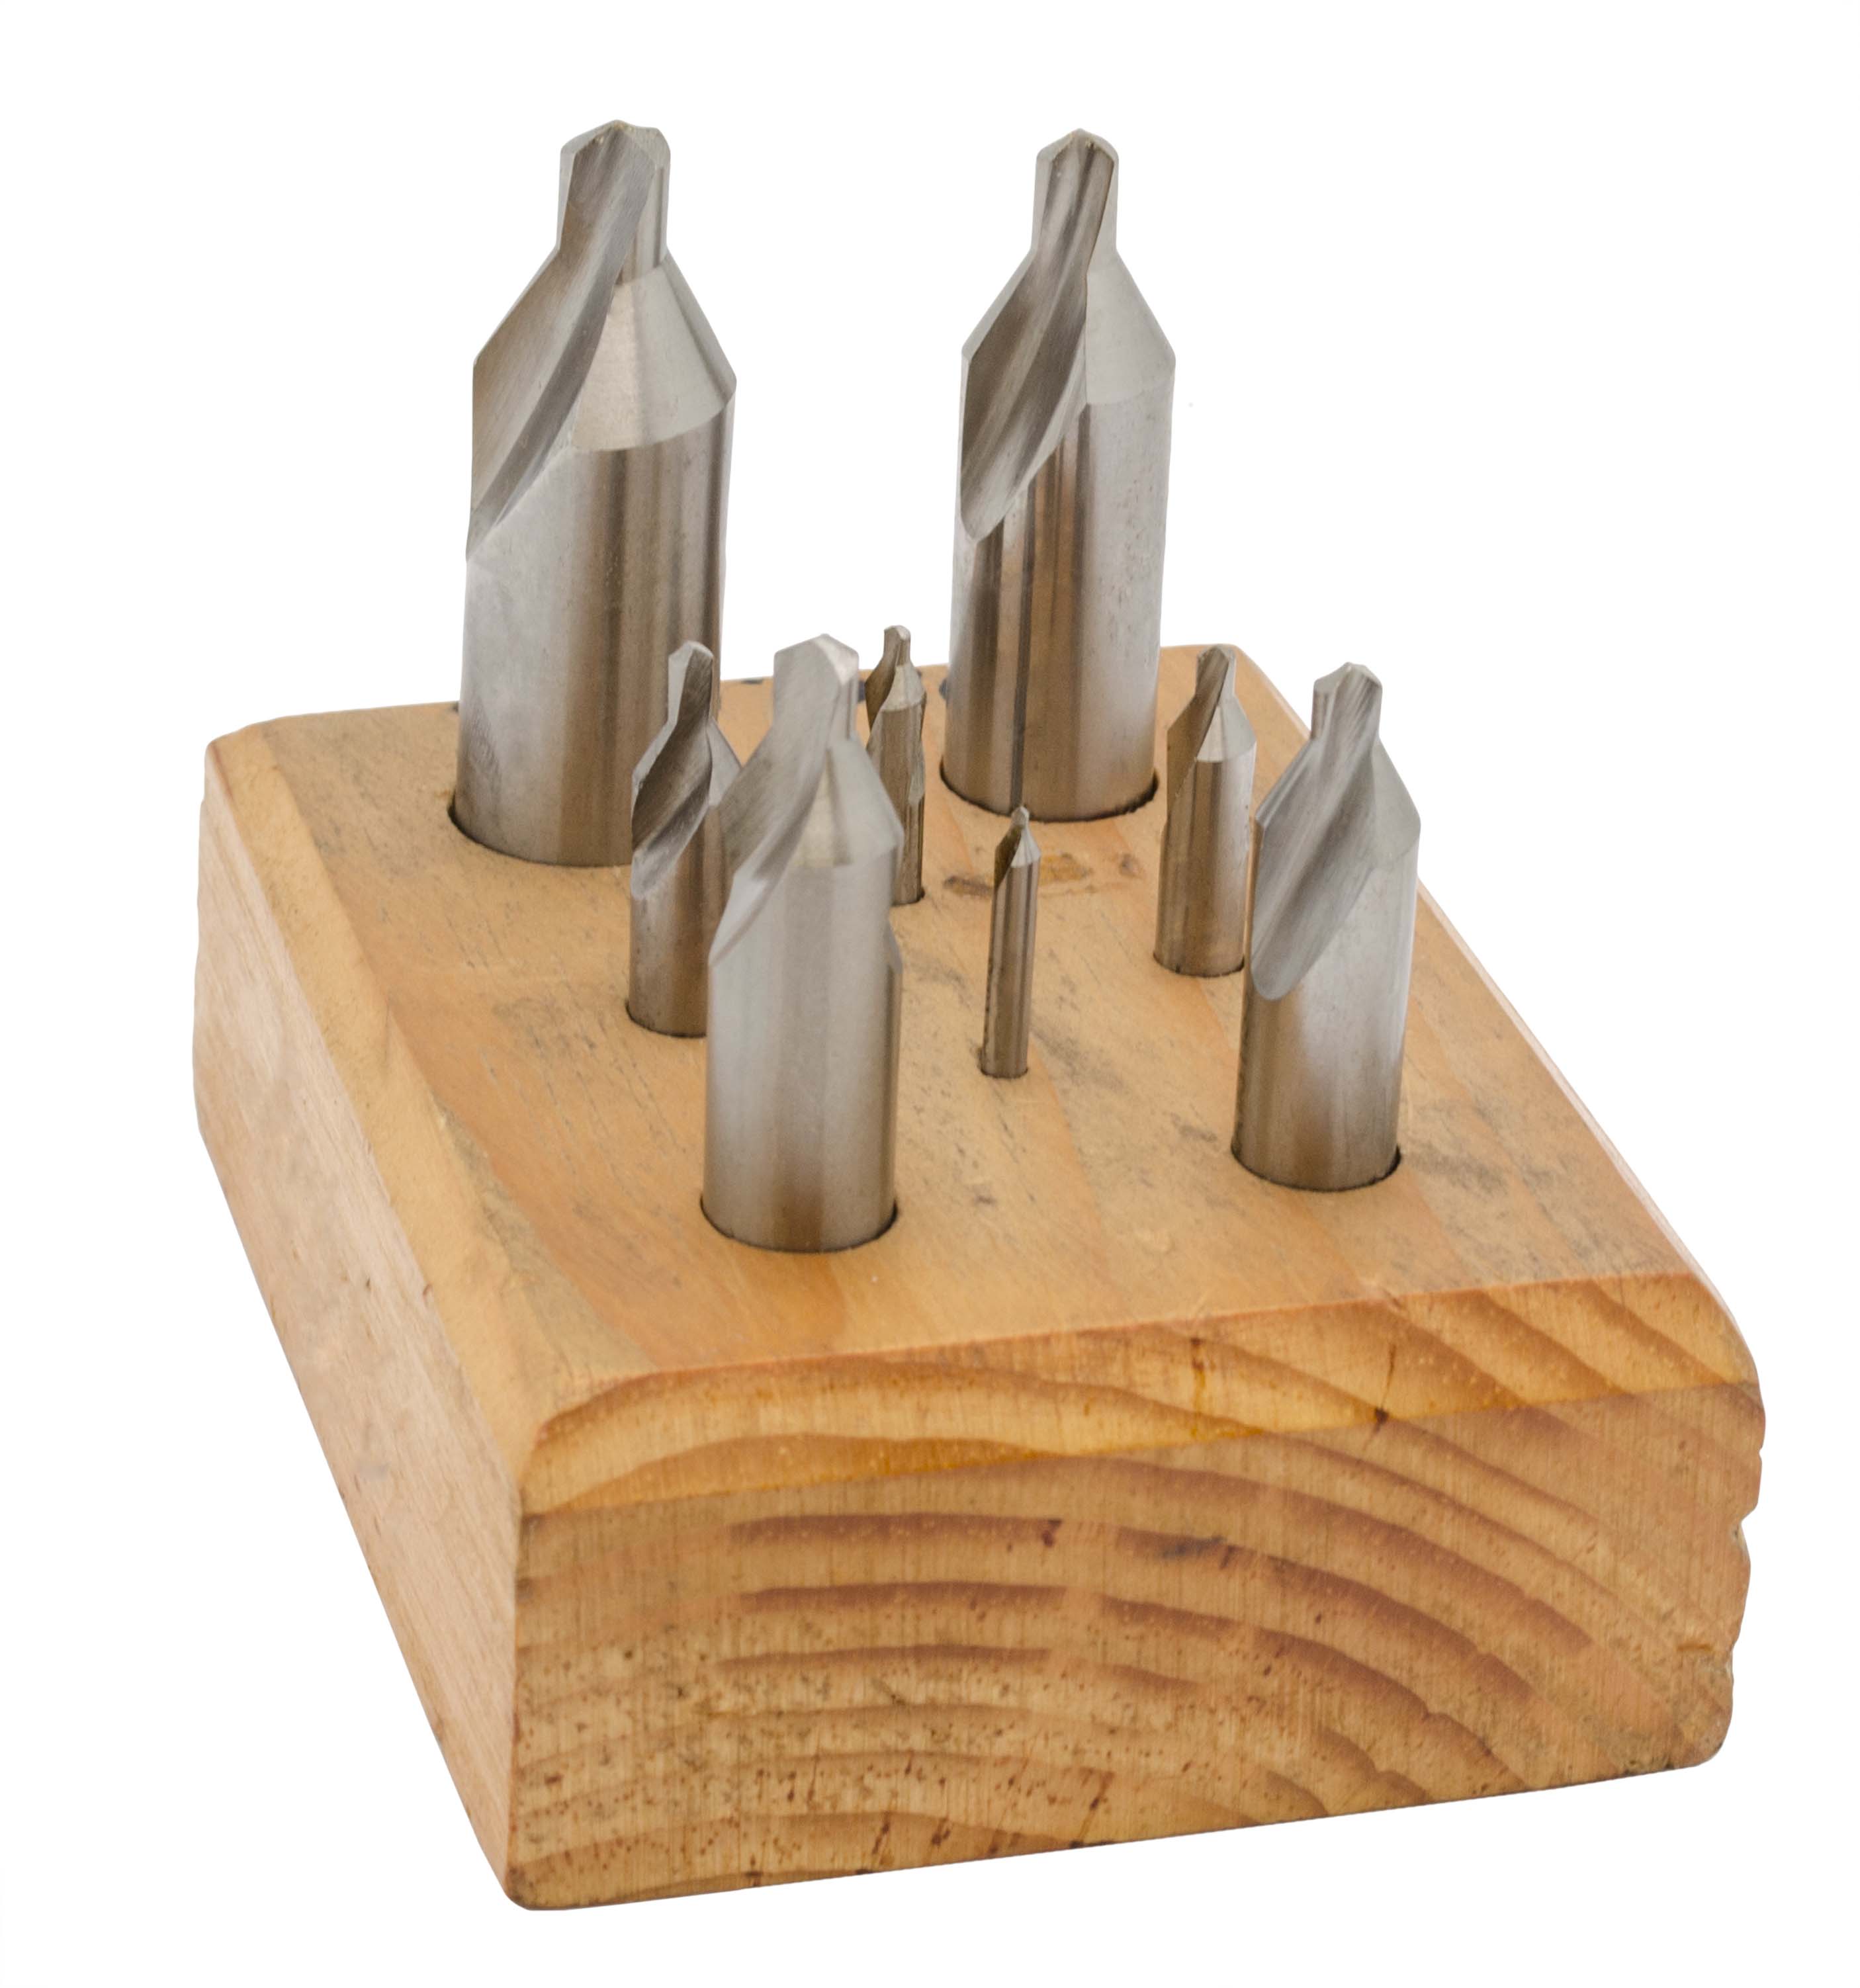 Combined Drills & Countersinks Sets